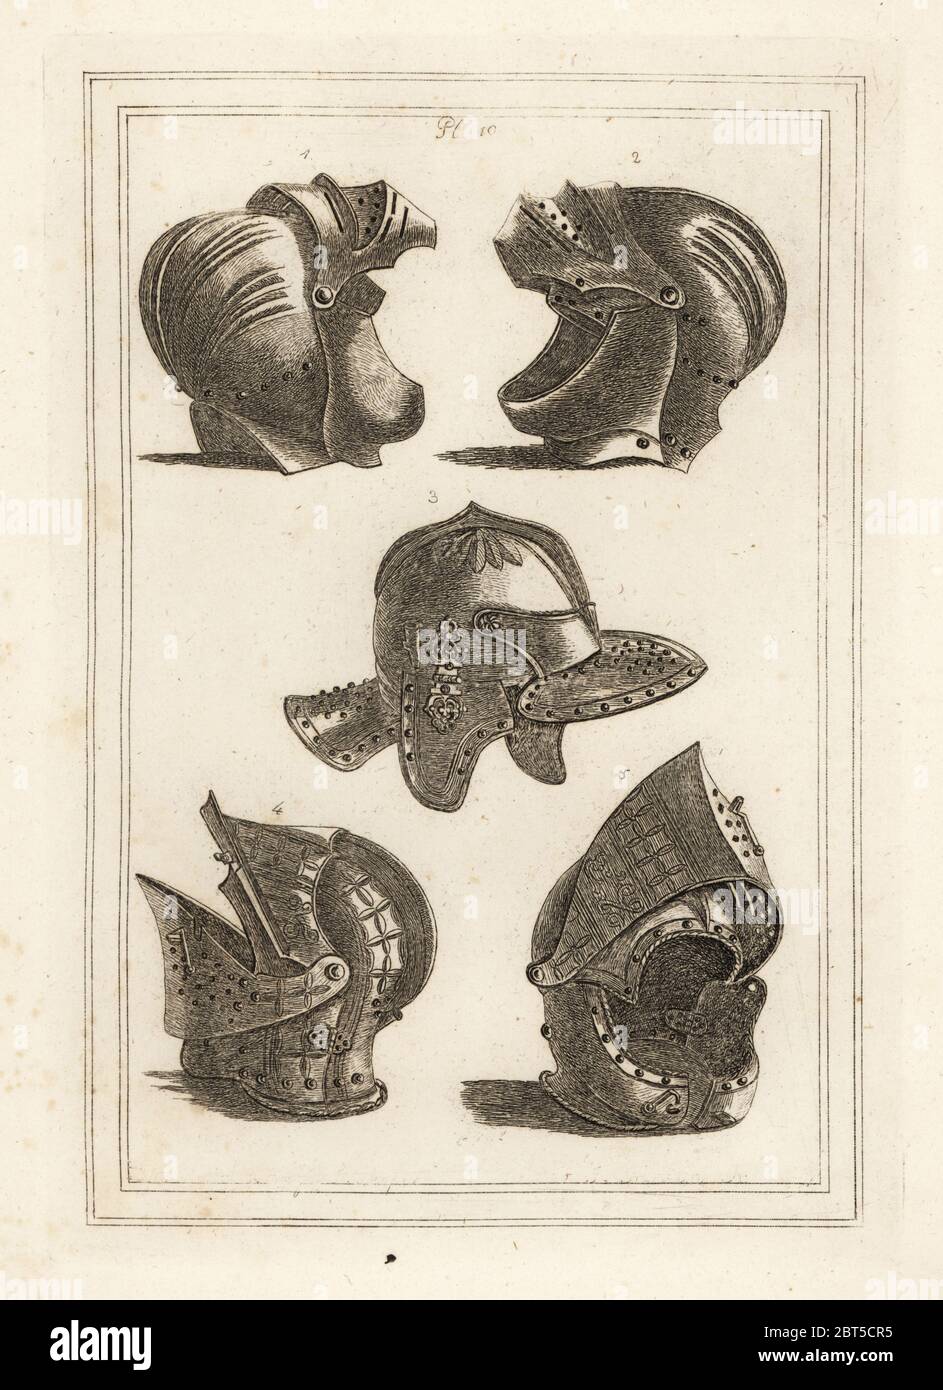 Helmet of John de Courcy, Earl of Ulster 1,2, Oliver Cromwells headpiece 3, tilting helmet 4,5. Copperplate engraving from Francis Grose's Military Antiquities respecting a History of the English Army, Stockdale, London, 1812. Stock Photo